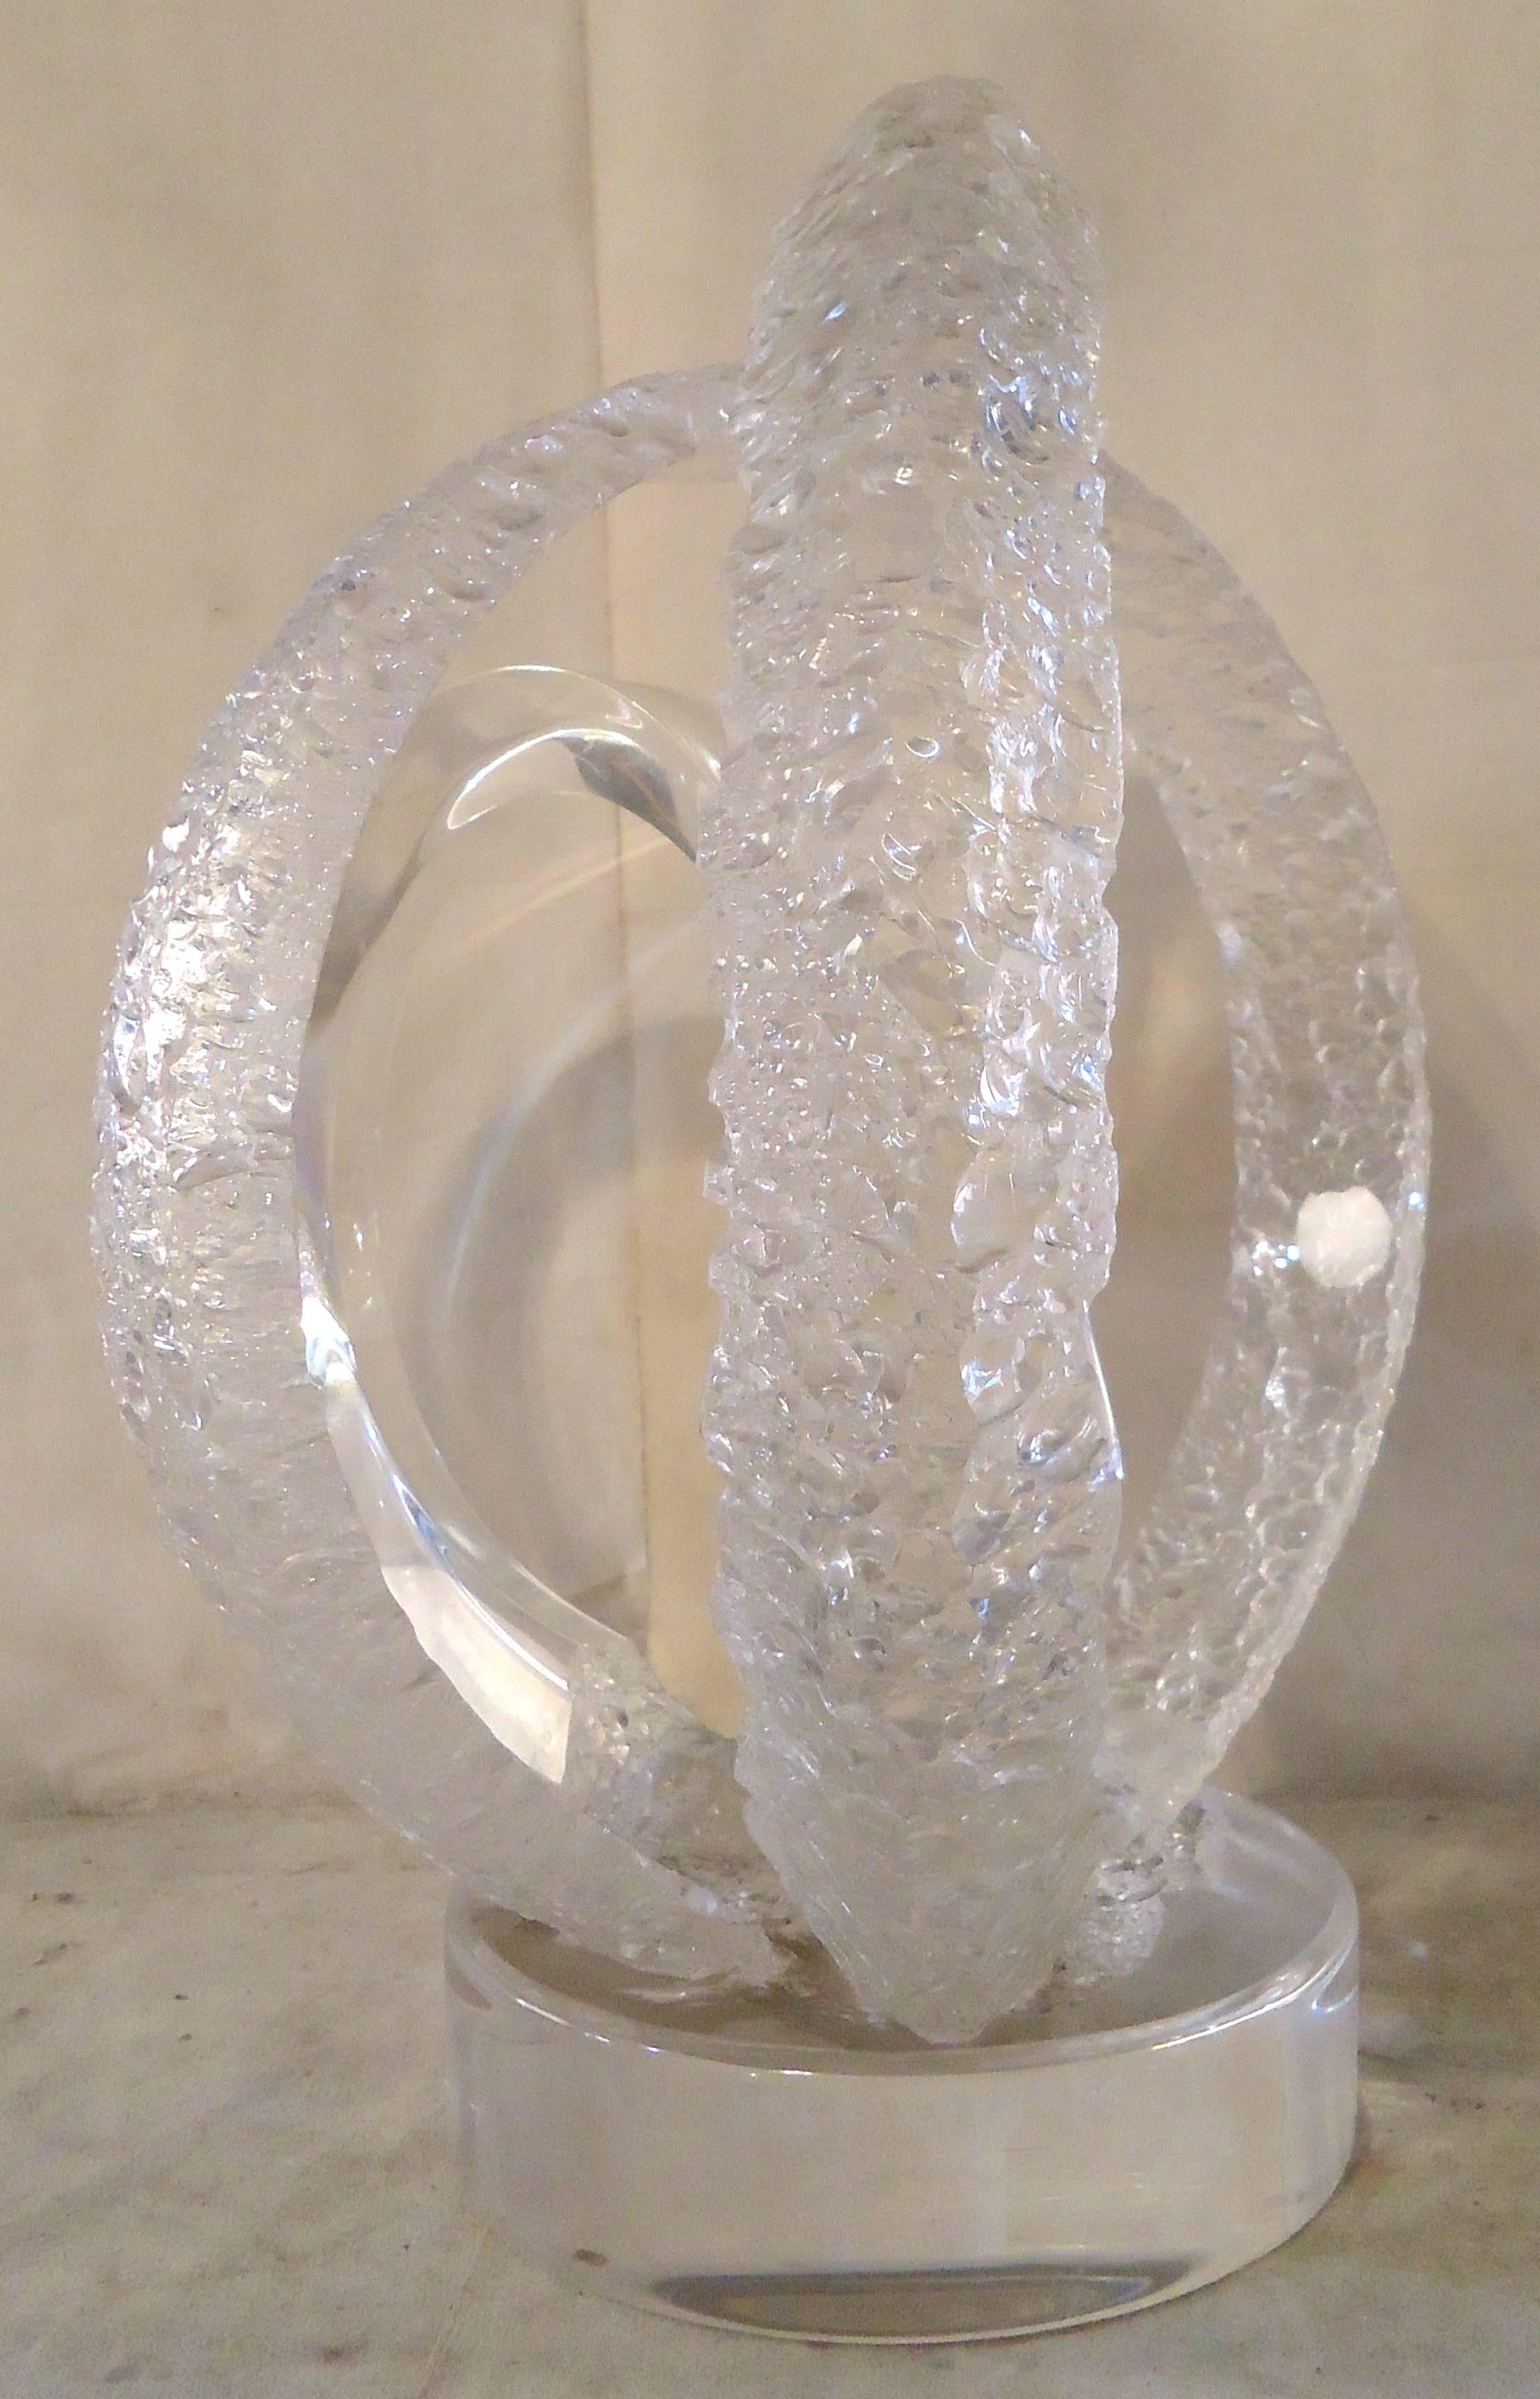 Free form art made of thick clear lucite with intersecting rings. Two rings have etched texturing and one is clear.

(Please confirm item location - NY or NJ - with dealer)
